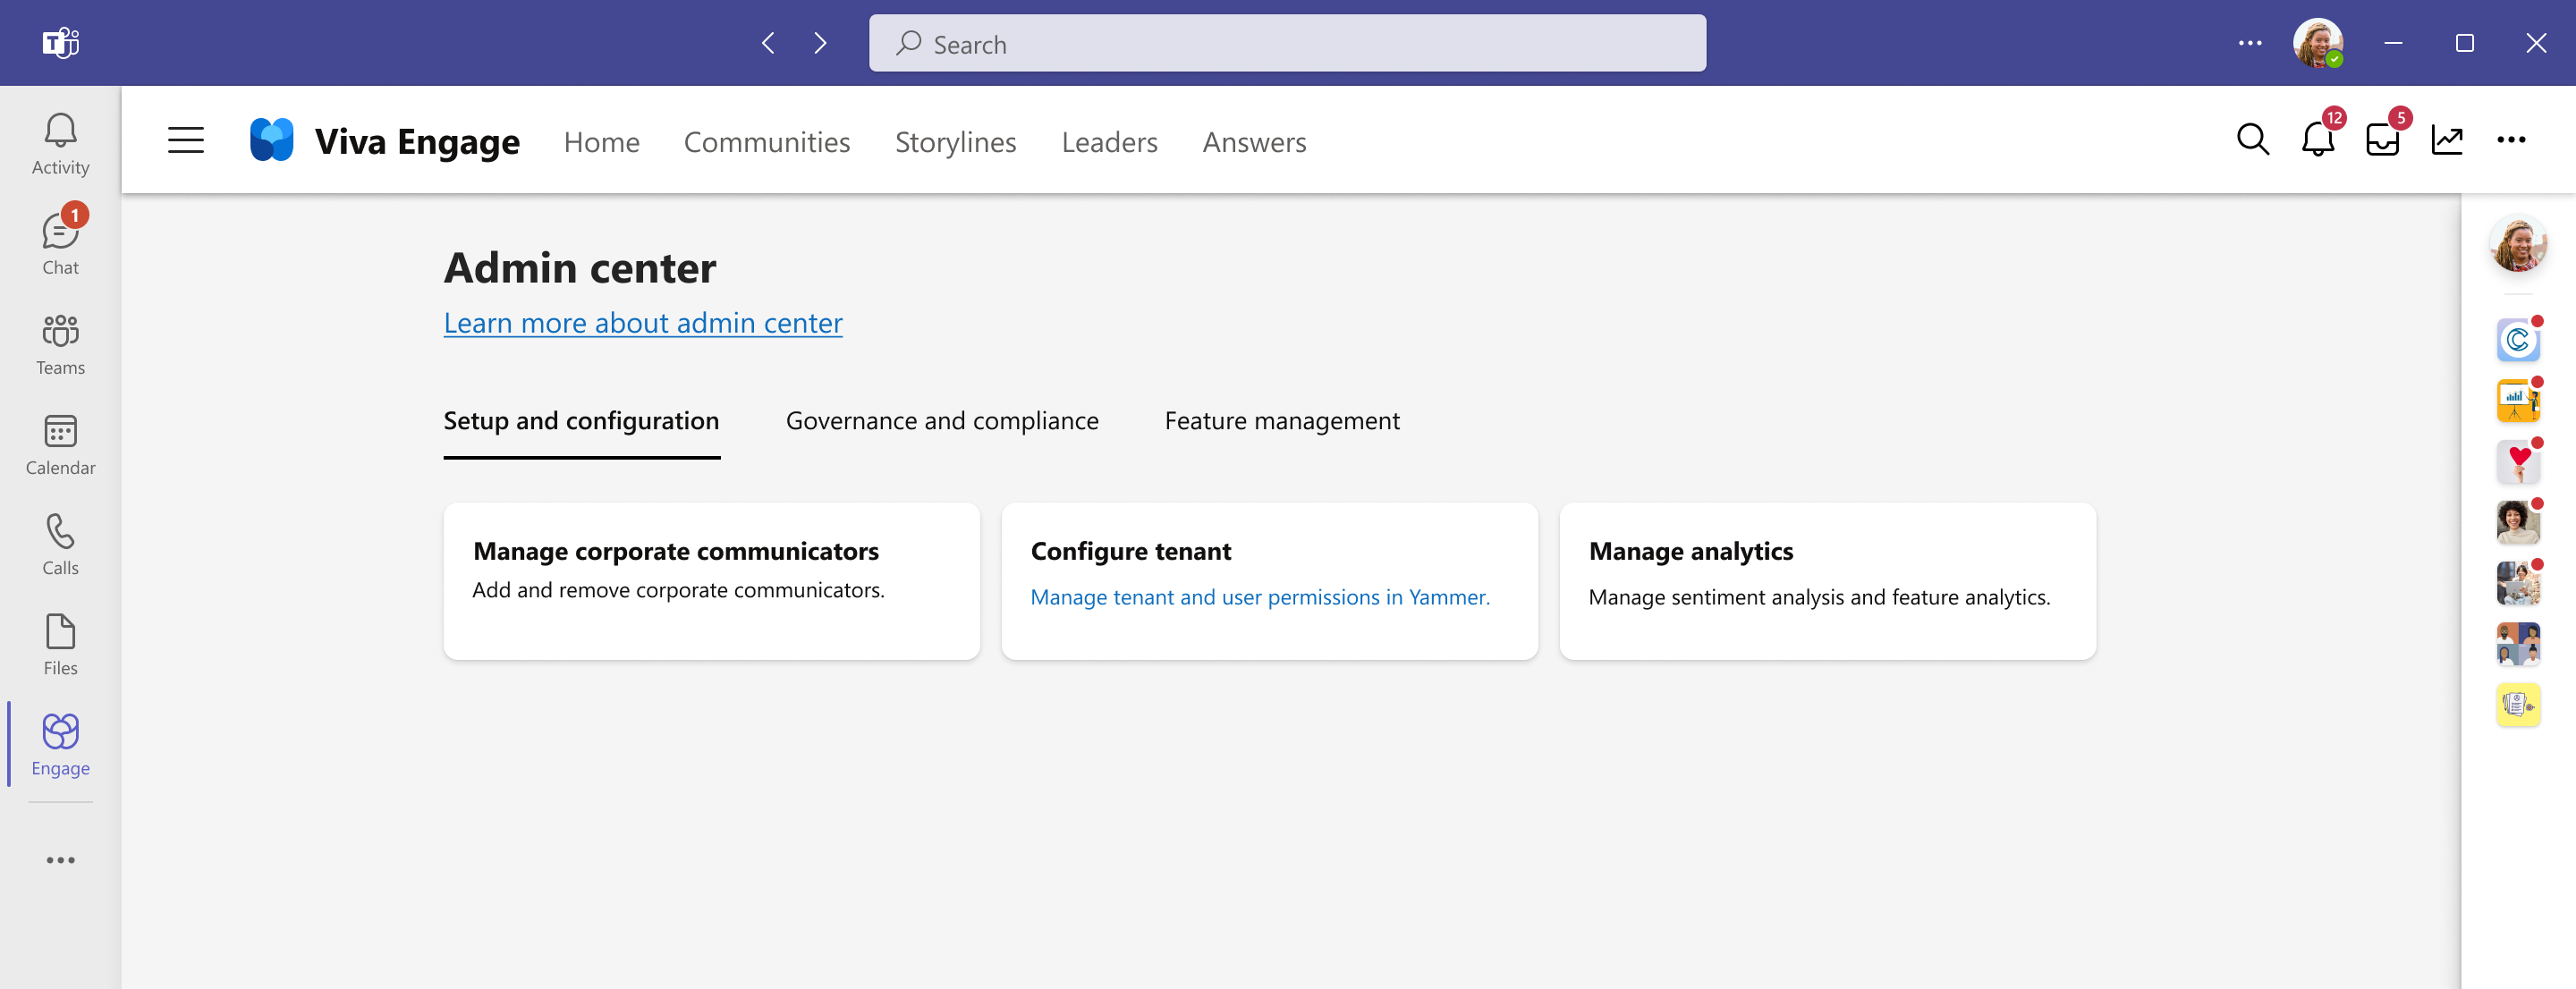 Image of the Engage admin center experience that admin will see.